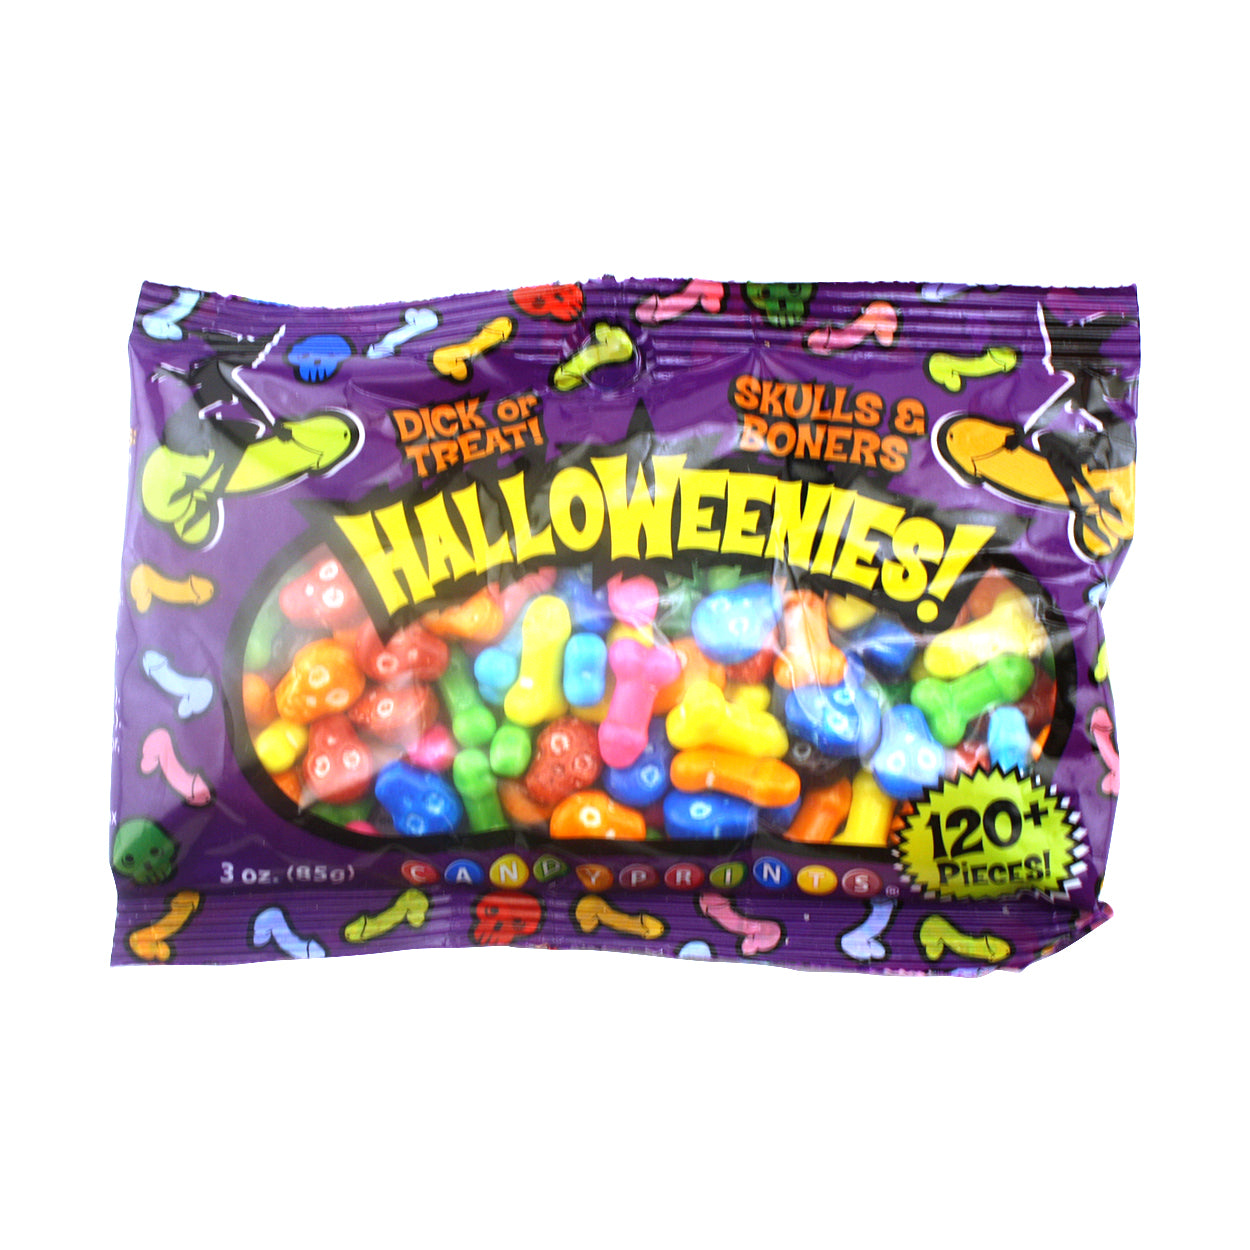 Image of Halloweenies Candy - Featuring Skulls and Boners!